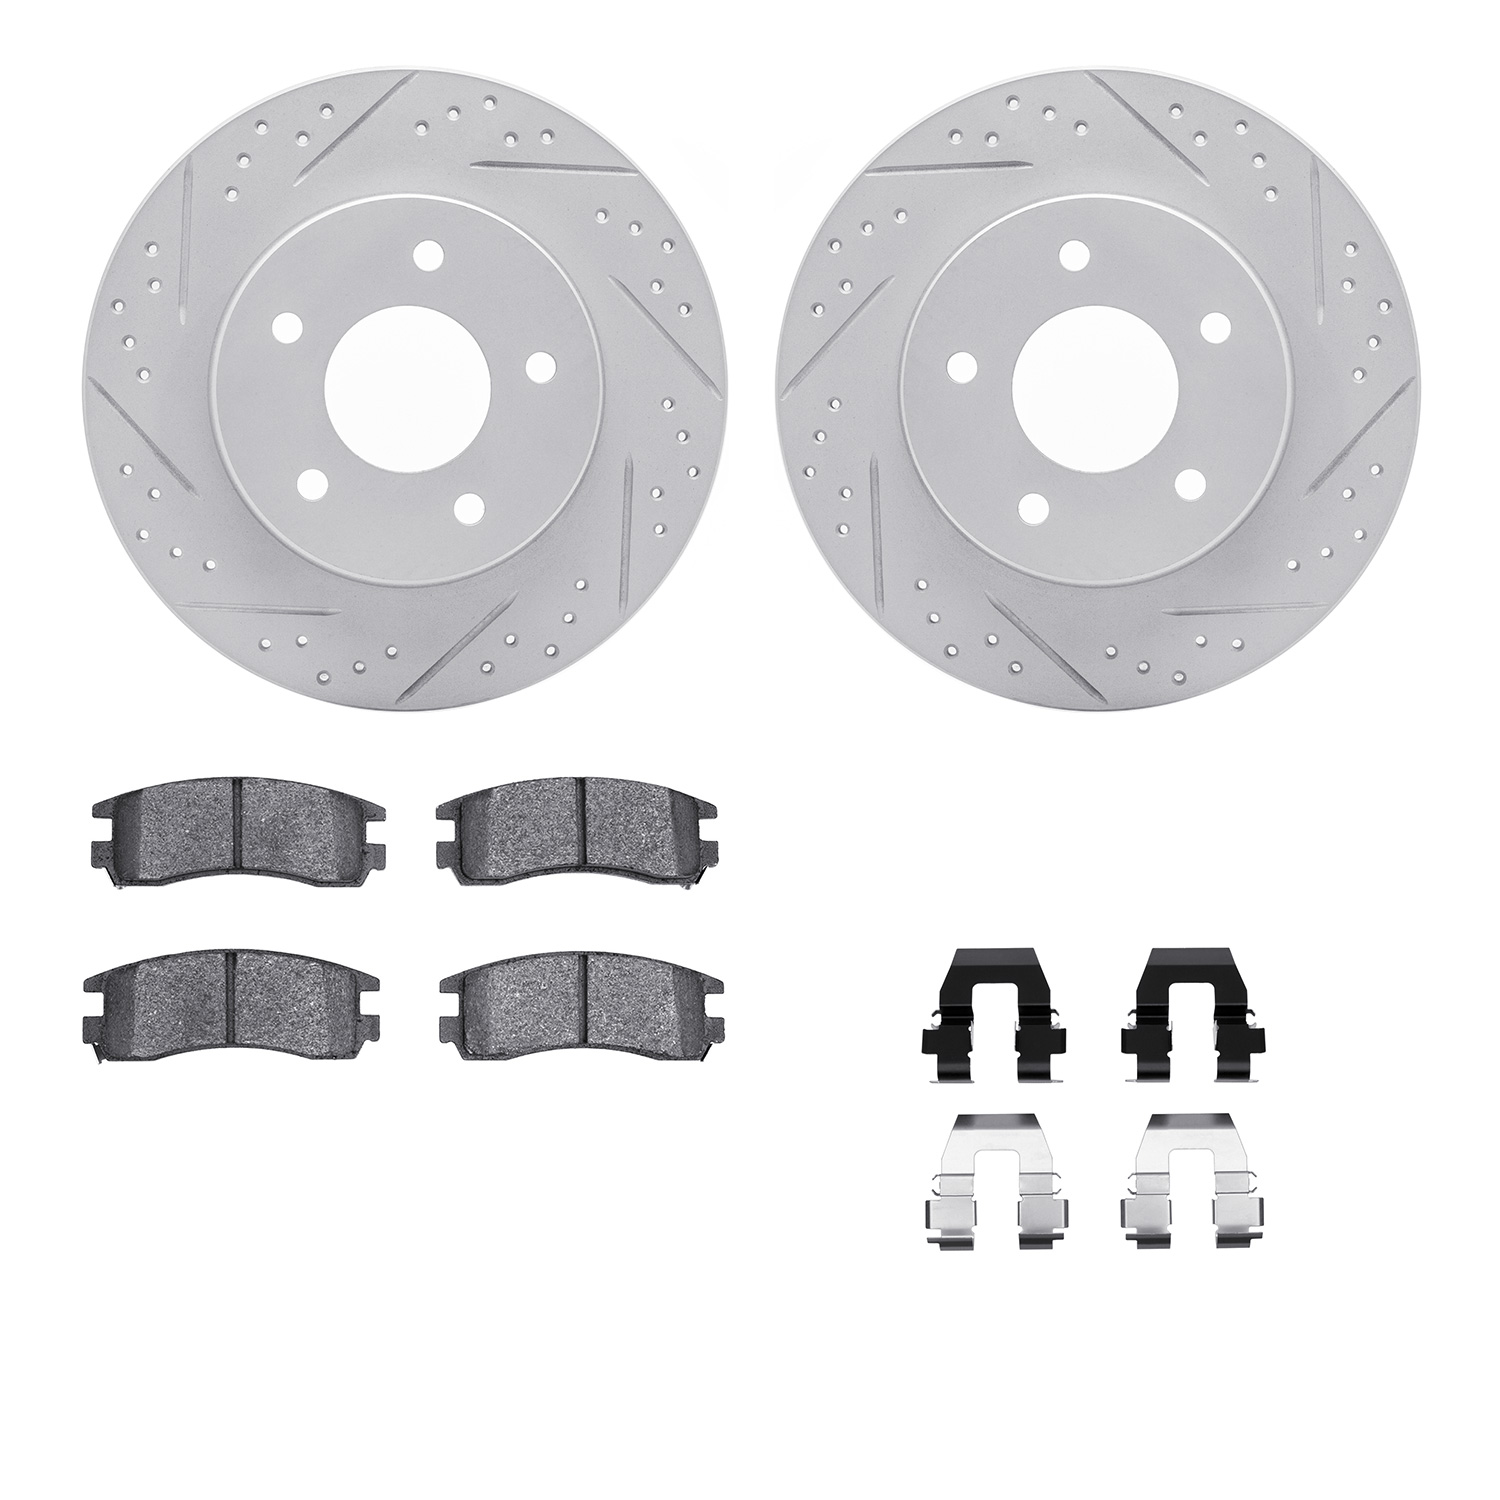 2512-52001 Geoperformance Drilled/Slotted Rotors w/5000 Advanced Brake Pads Kit & Hardware, 1997-2005 GM, Position: Rear